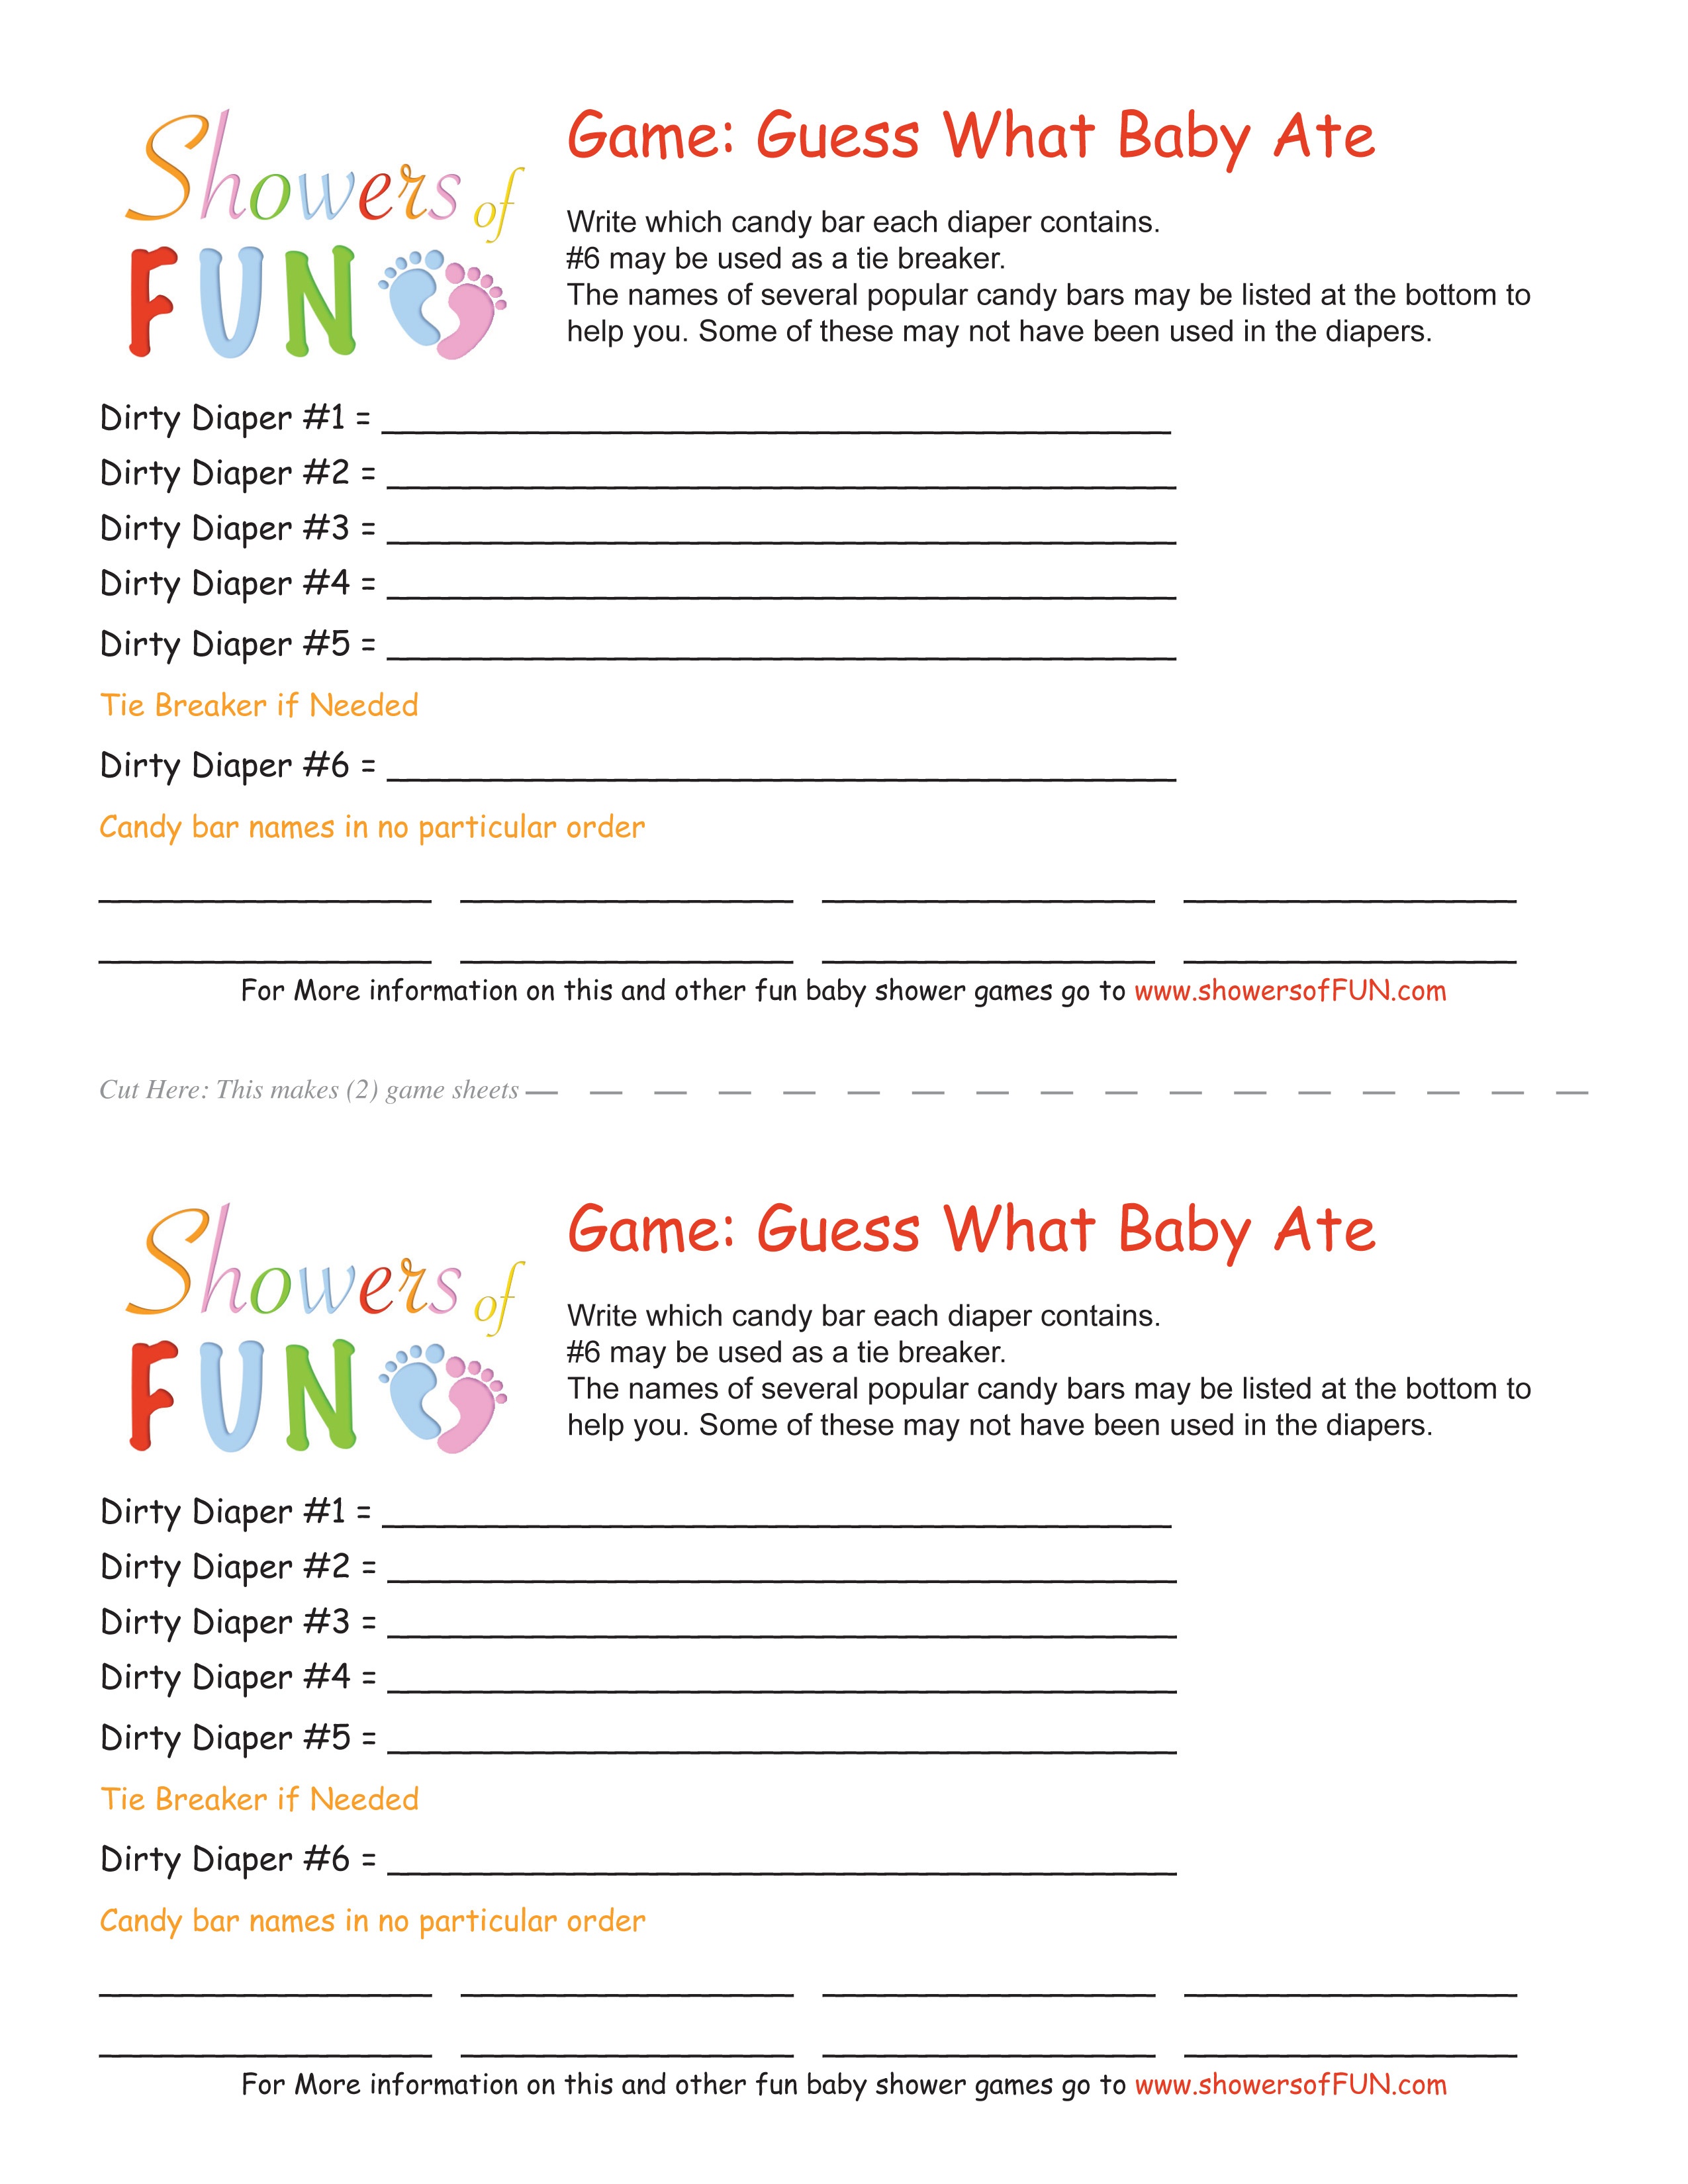 Guess What The Baby Ate - Candy Bar Dirty Diaper Game - Candy Bar Baby Shower Game Free Printable